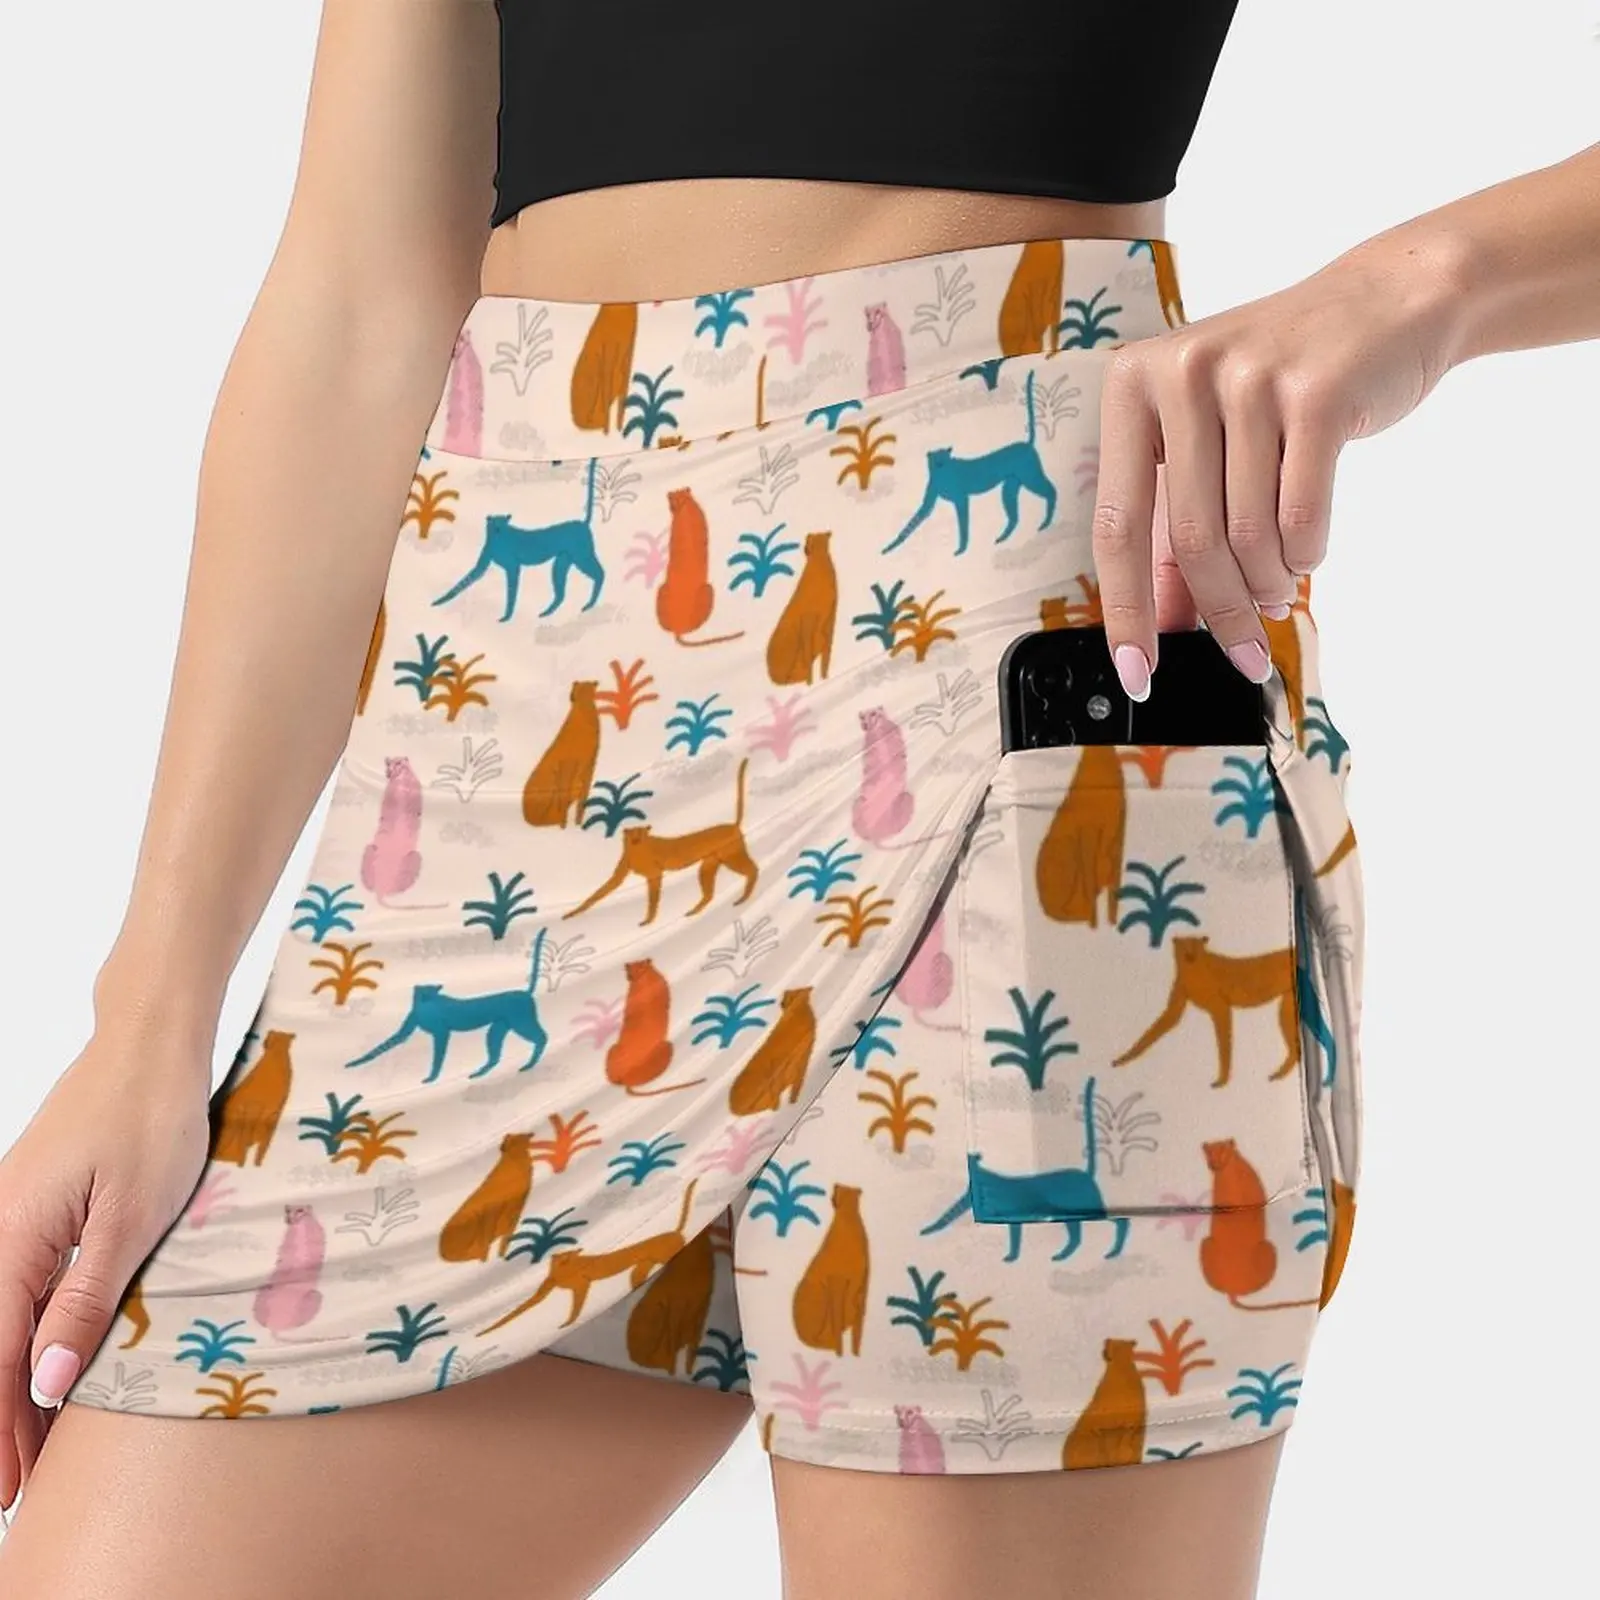 

Cheetah In The Jungle Women's skirt Aesthetic skirts New Fashion Short Skirts Cheetah Leo Leopard Tiger Tigers Jungle Forest